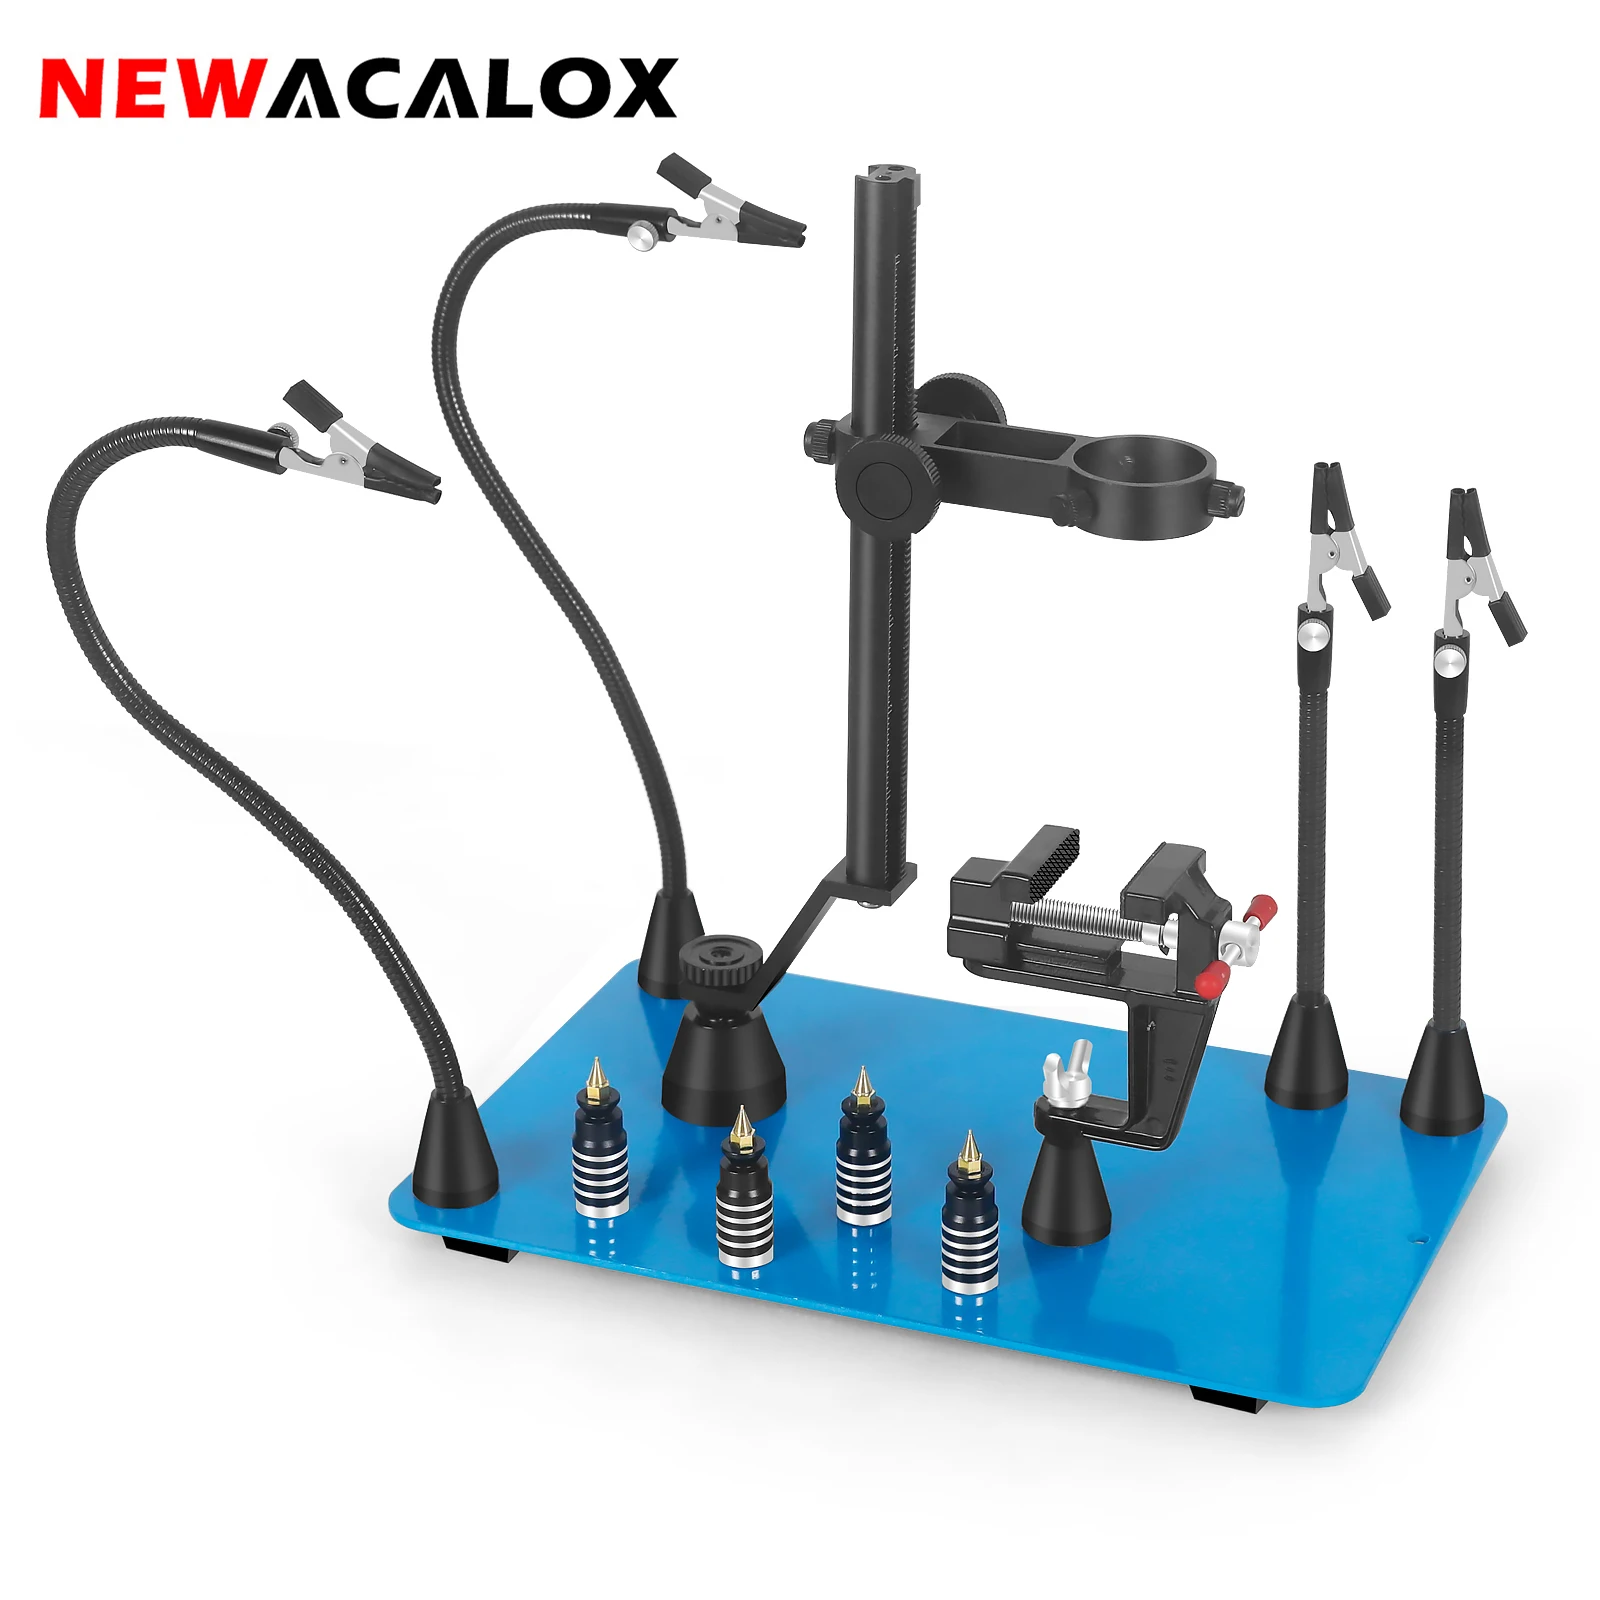 

NEWACALOX Magnetic Soldering Third Hand Large Iron Plate Base Heat Gun Holder PCB Clip 3X LED Magnifier Soldering Work Station